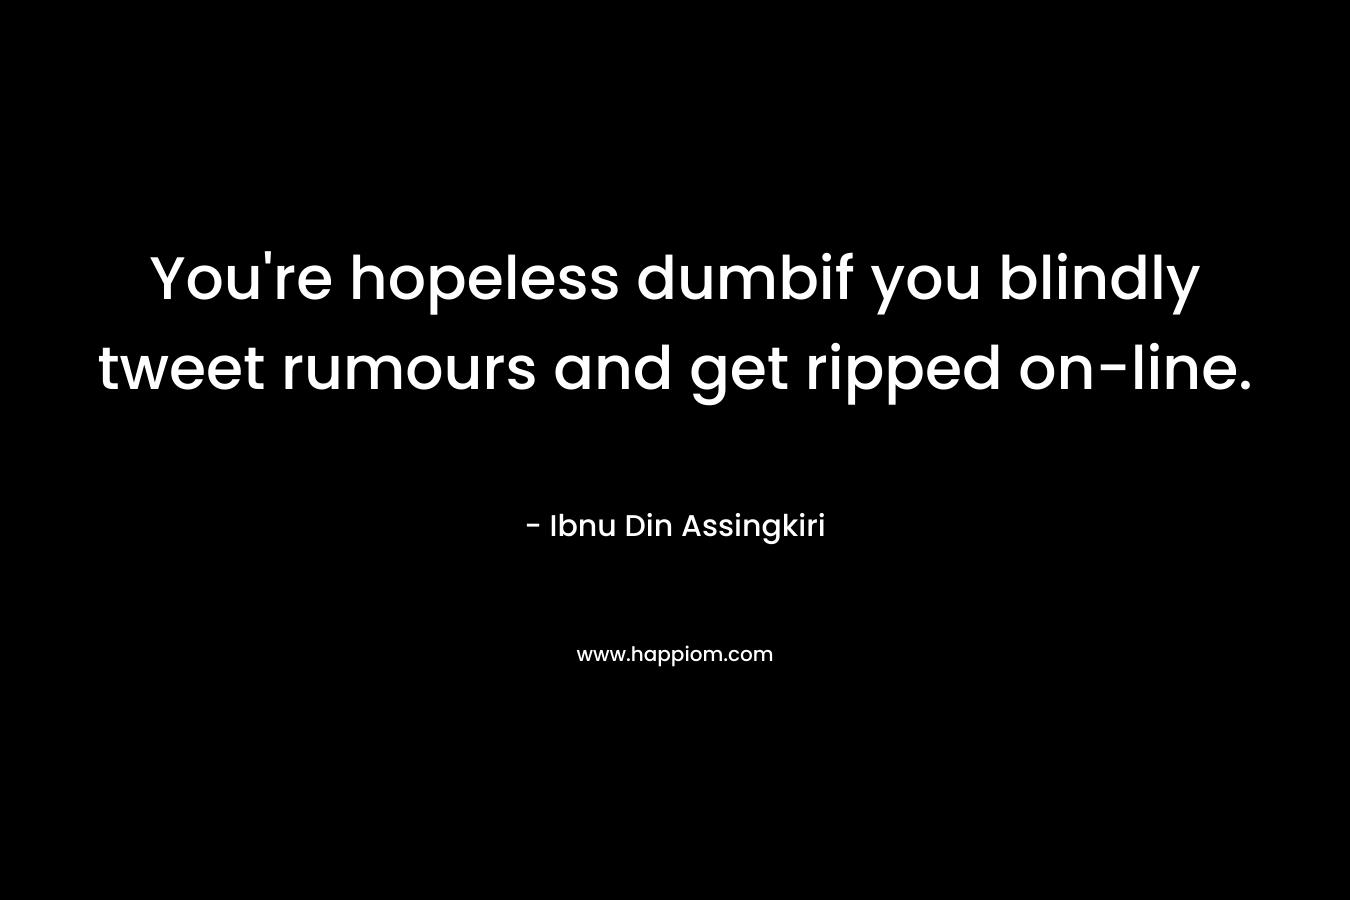 You’re hopeless dumbif you blindly tweet rumours and get ripped on-line. – Ibnu Din Assingkiri